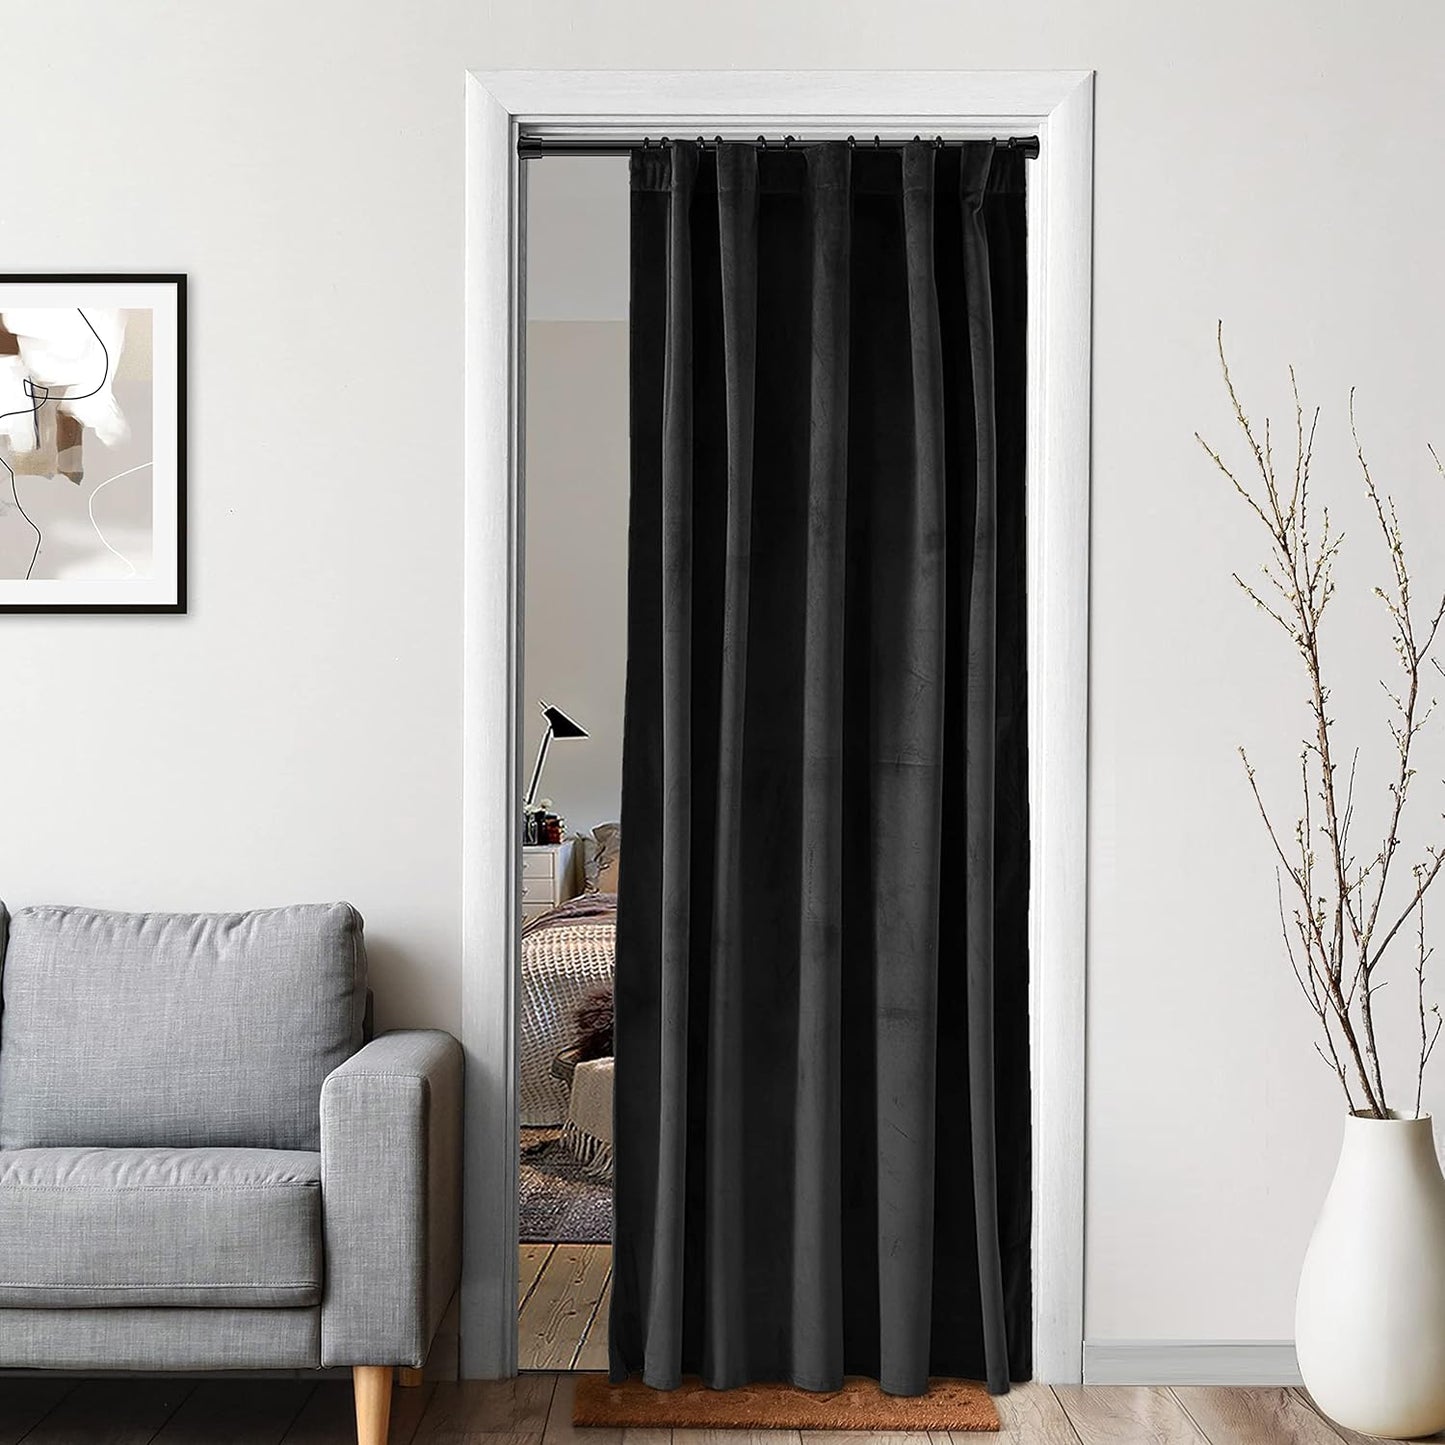 XTMYI Velvet Blackout Door Curtain Panels for Bedroom,Thermal Insulated Winter Warm Back Tab Rod Pocket Black Out Cover Doorway Curtains Privacy/Window Drapes,80 Inch Length  XTMYI TEXTILE Black 52X80 